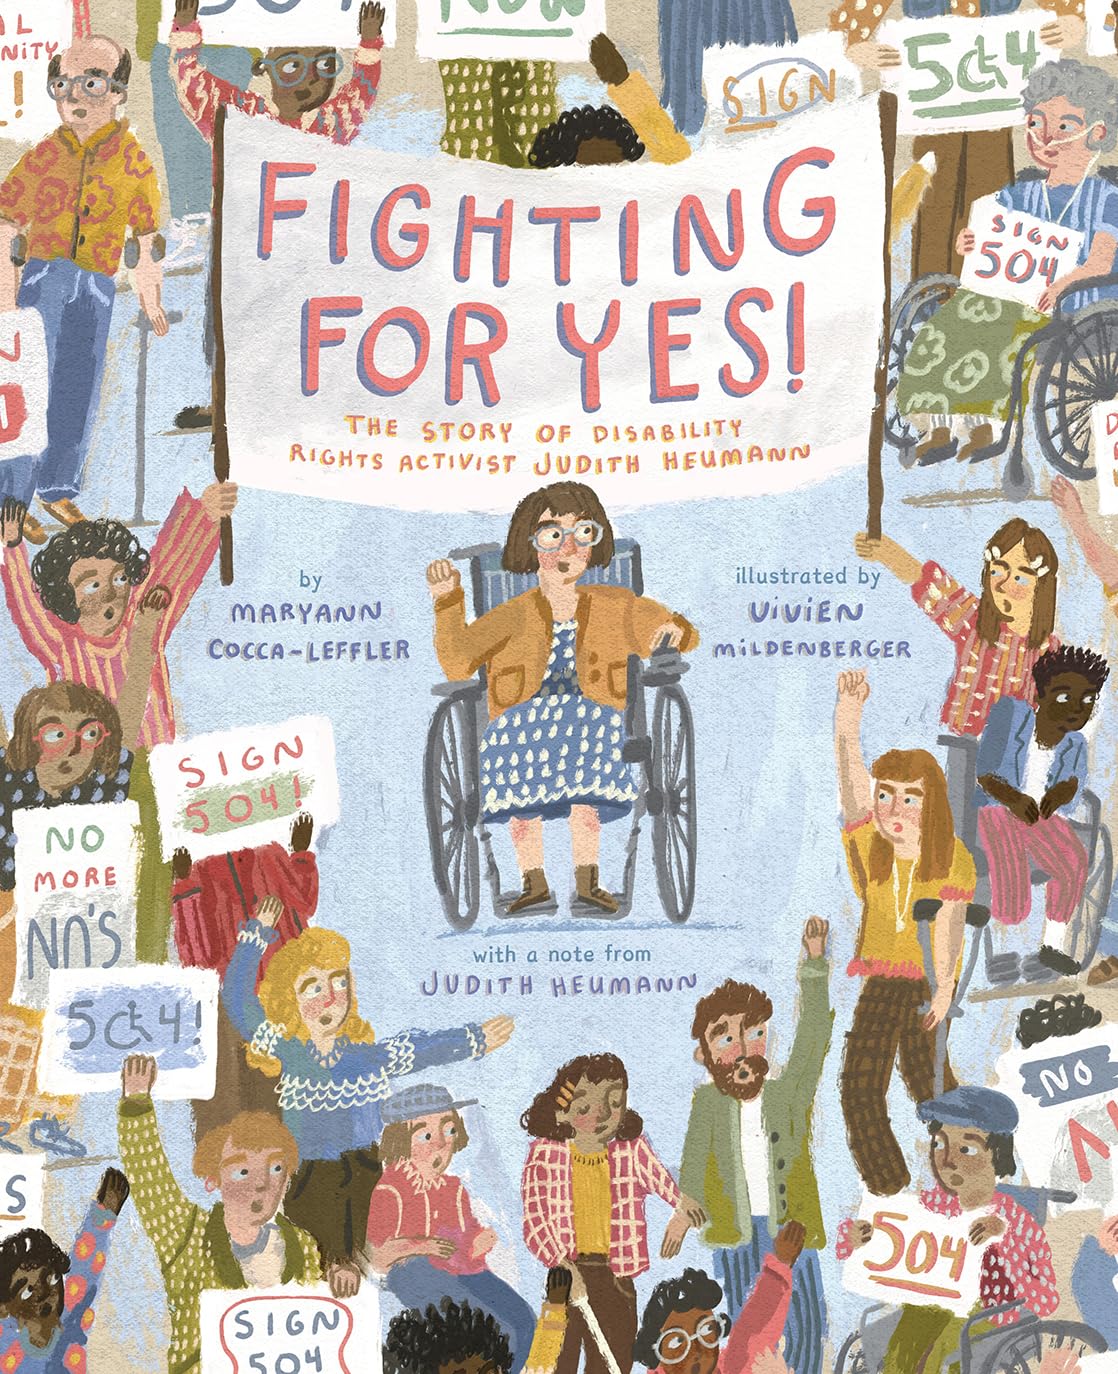 Image for "Fighting for YES!"